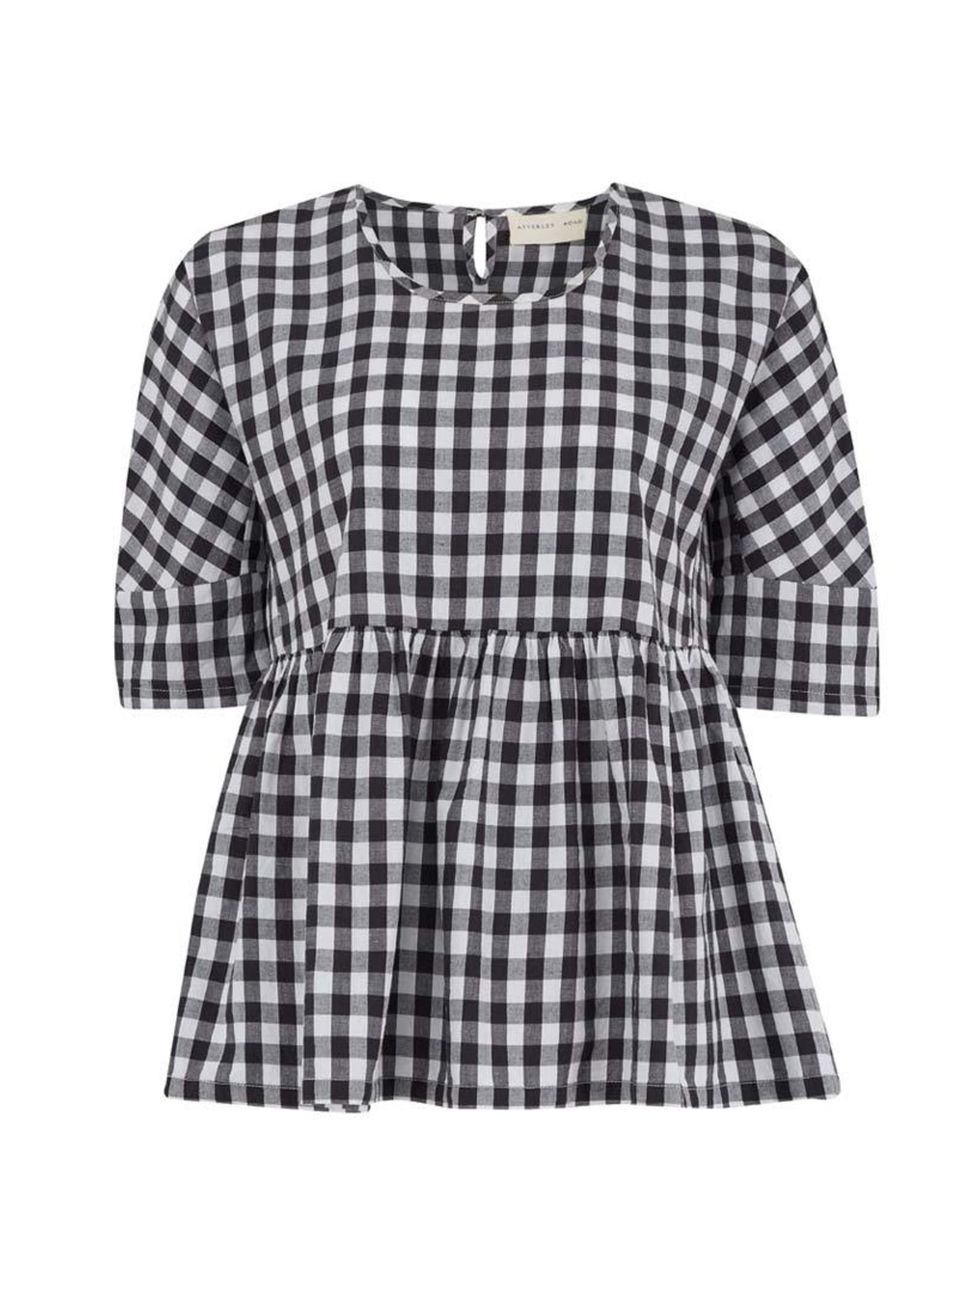 <p>Acting Commissioning Editor Georgia Simmons will pair gingham with denim.</p>

<p><a href="http://www.atterleyroad.com/black-gingham-woven-top-1.html" target="_blank">Atterley Road</a> top, £35</p>